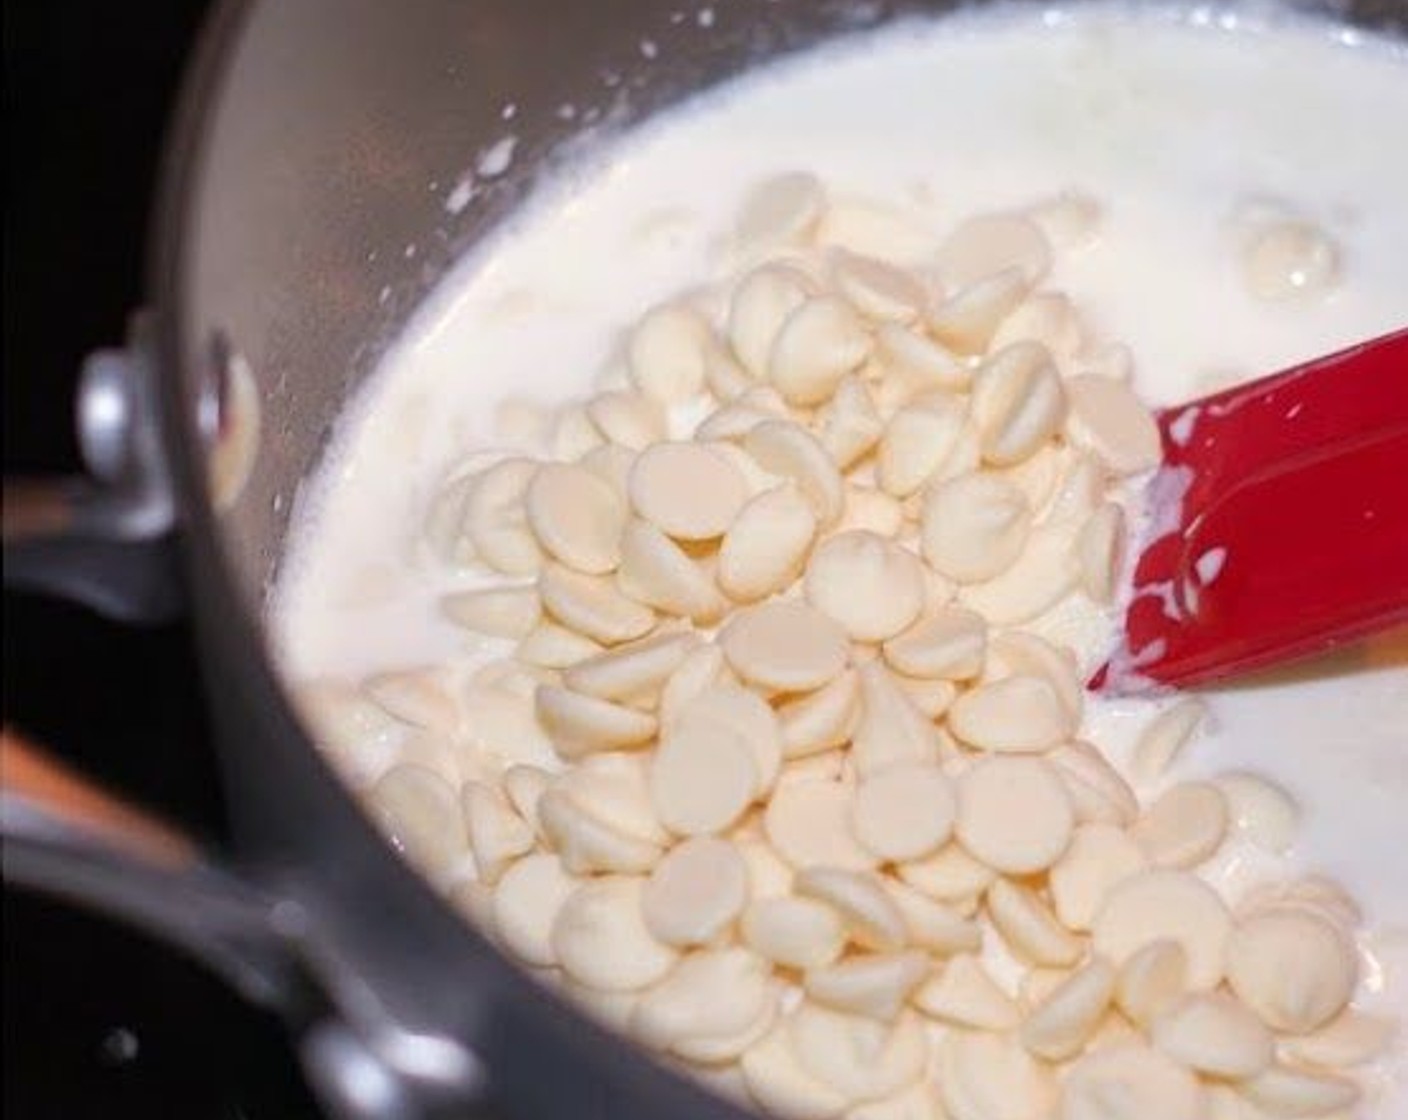 step 7 Place Heavy Cream (2/3 cup) in a small saucepan and bring to a simmer over low heat. Stir in the White Chocolate Chips (1 cup) until melted, then add the Butter (2 Tbsp). Stir until well blended.